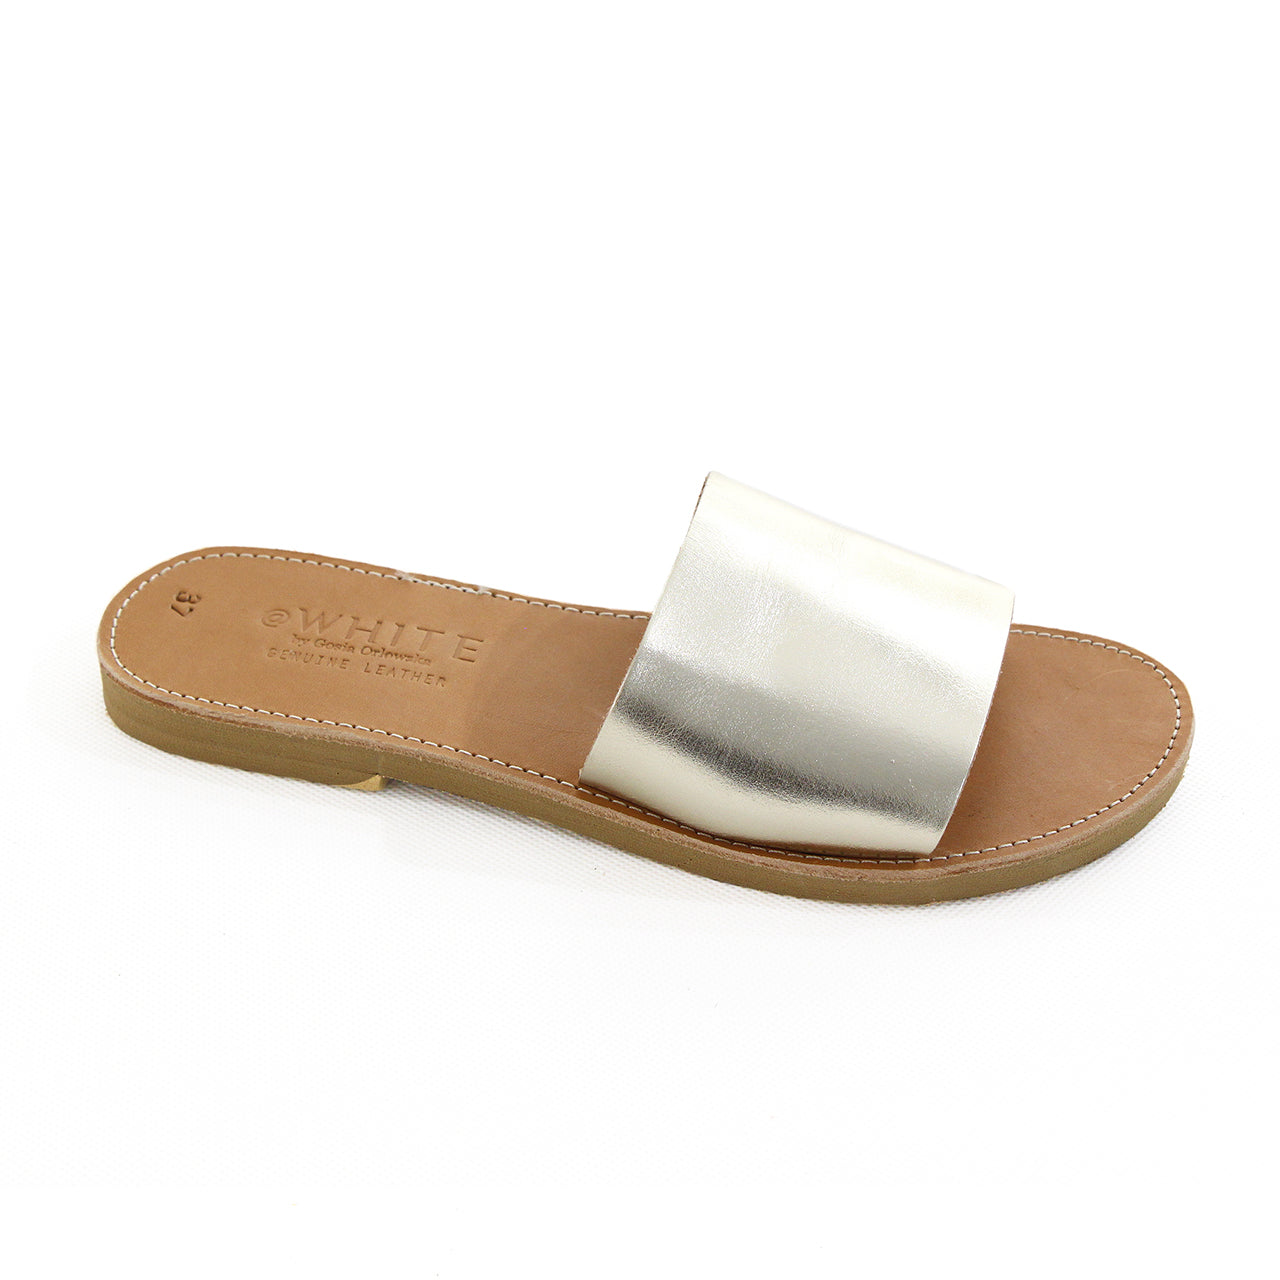 @WHITE / Clio leather sandals - GOLD